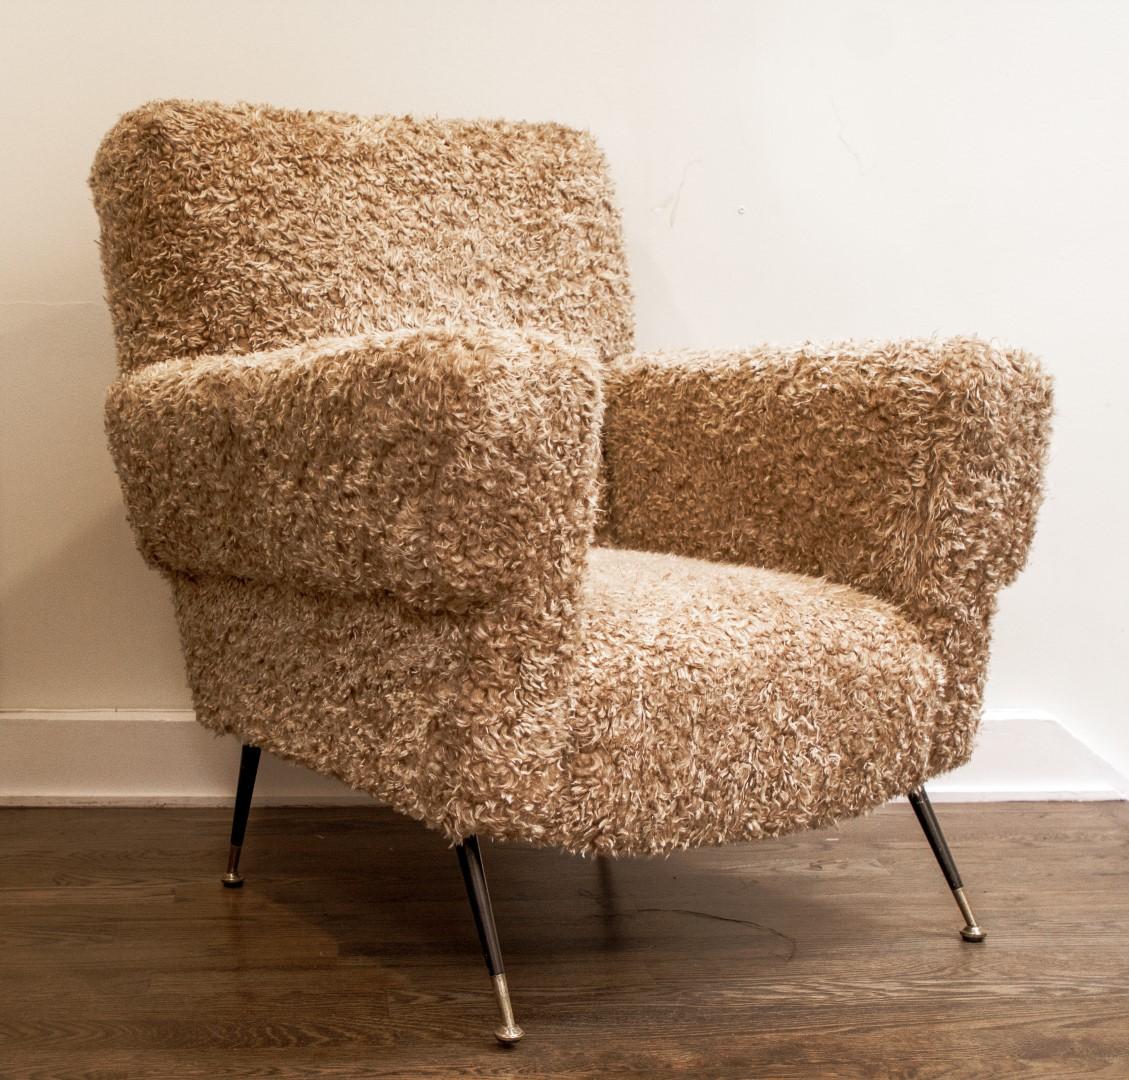 A pair of midcentury Italian sculptural armchairs in a biscuit color faux lambswool, circa 1950. Reminiscent of giant teddy bears, the oversize chairs sit on splayed metal legs with brass sabots. 

Provenance: Obsolete.